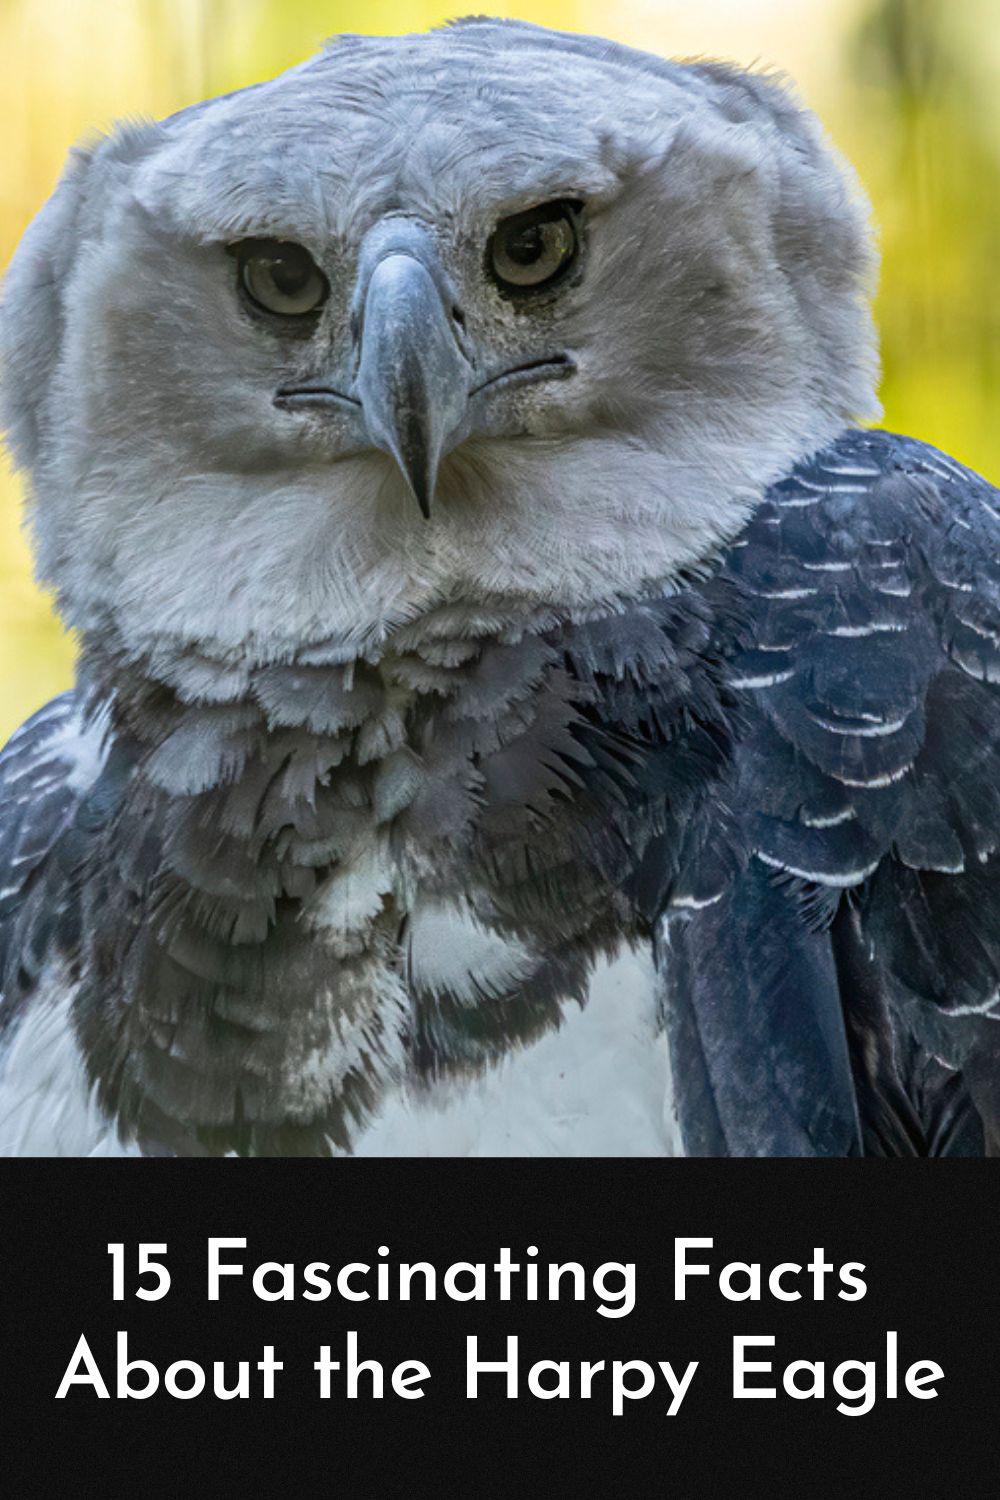 All That's Interesting - Known for its 6.5-foot wingspan and its  crown-shaped head, the harpy eagle can travel upwards of 50 miles per hour  through the . Weaving in and out of